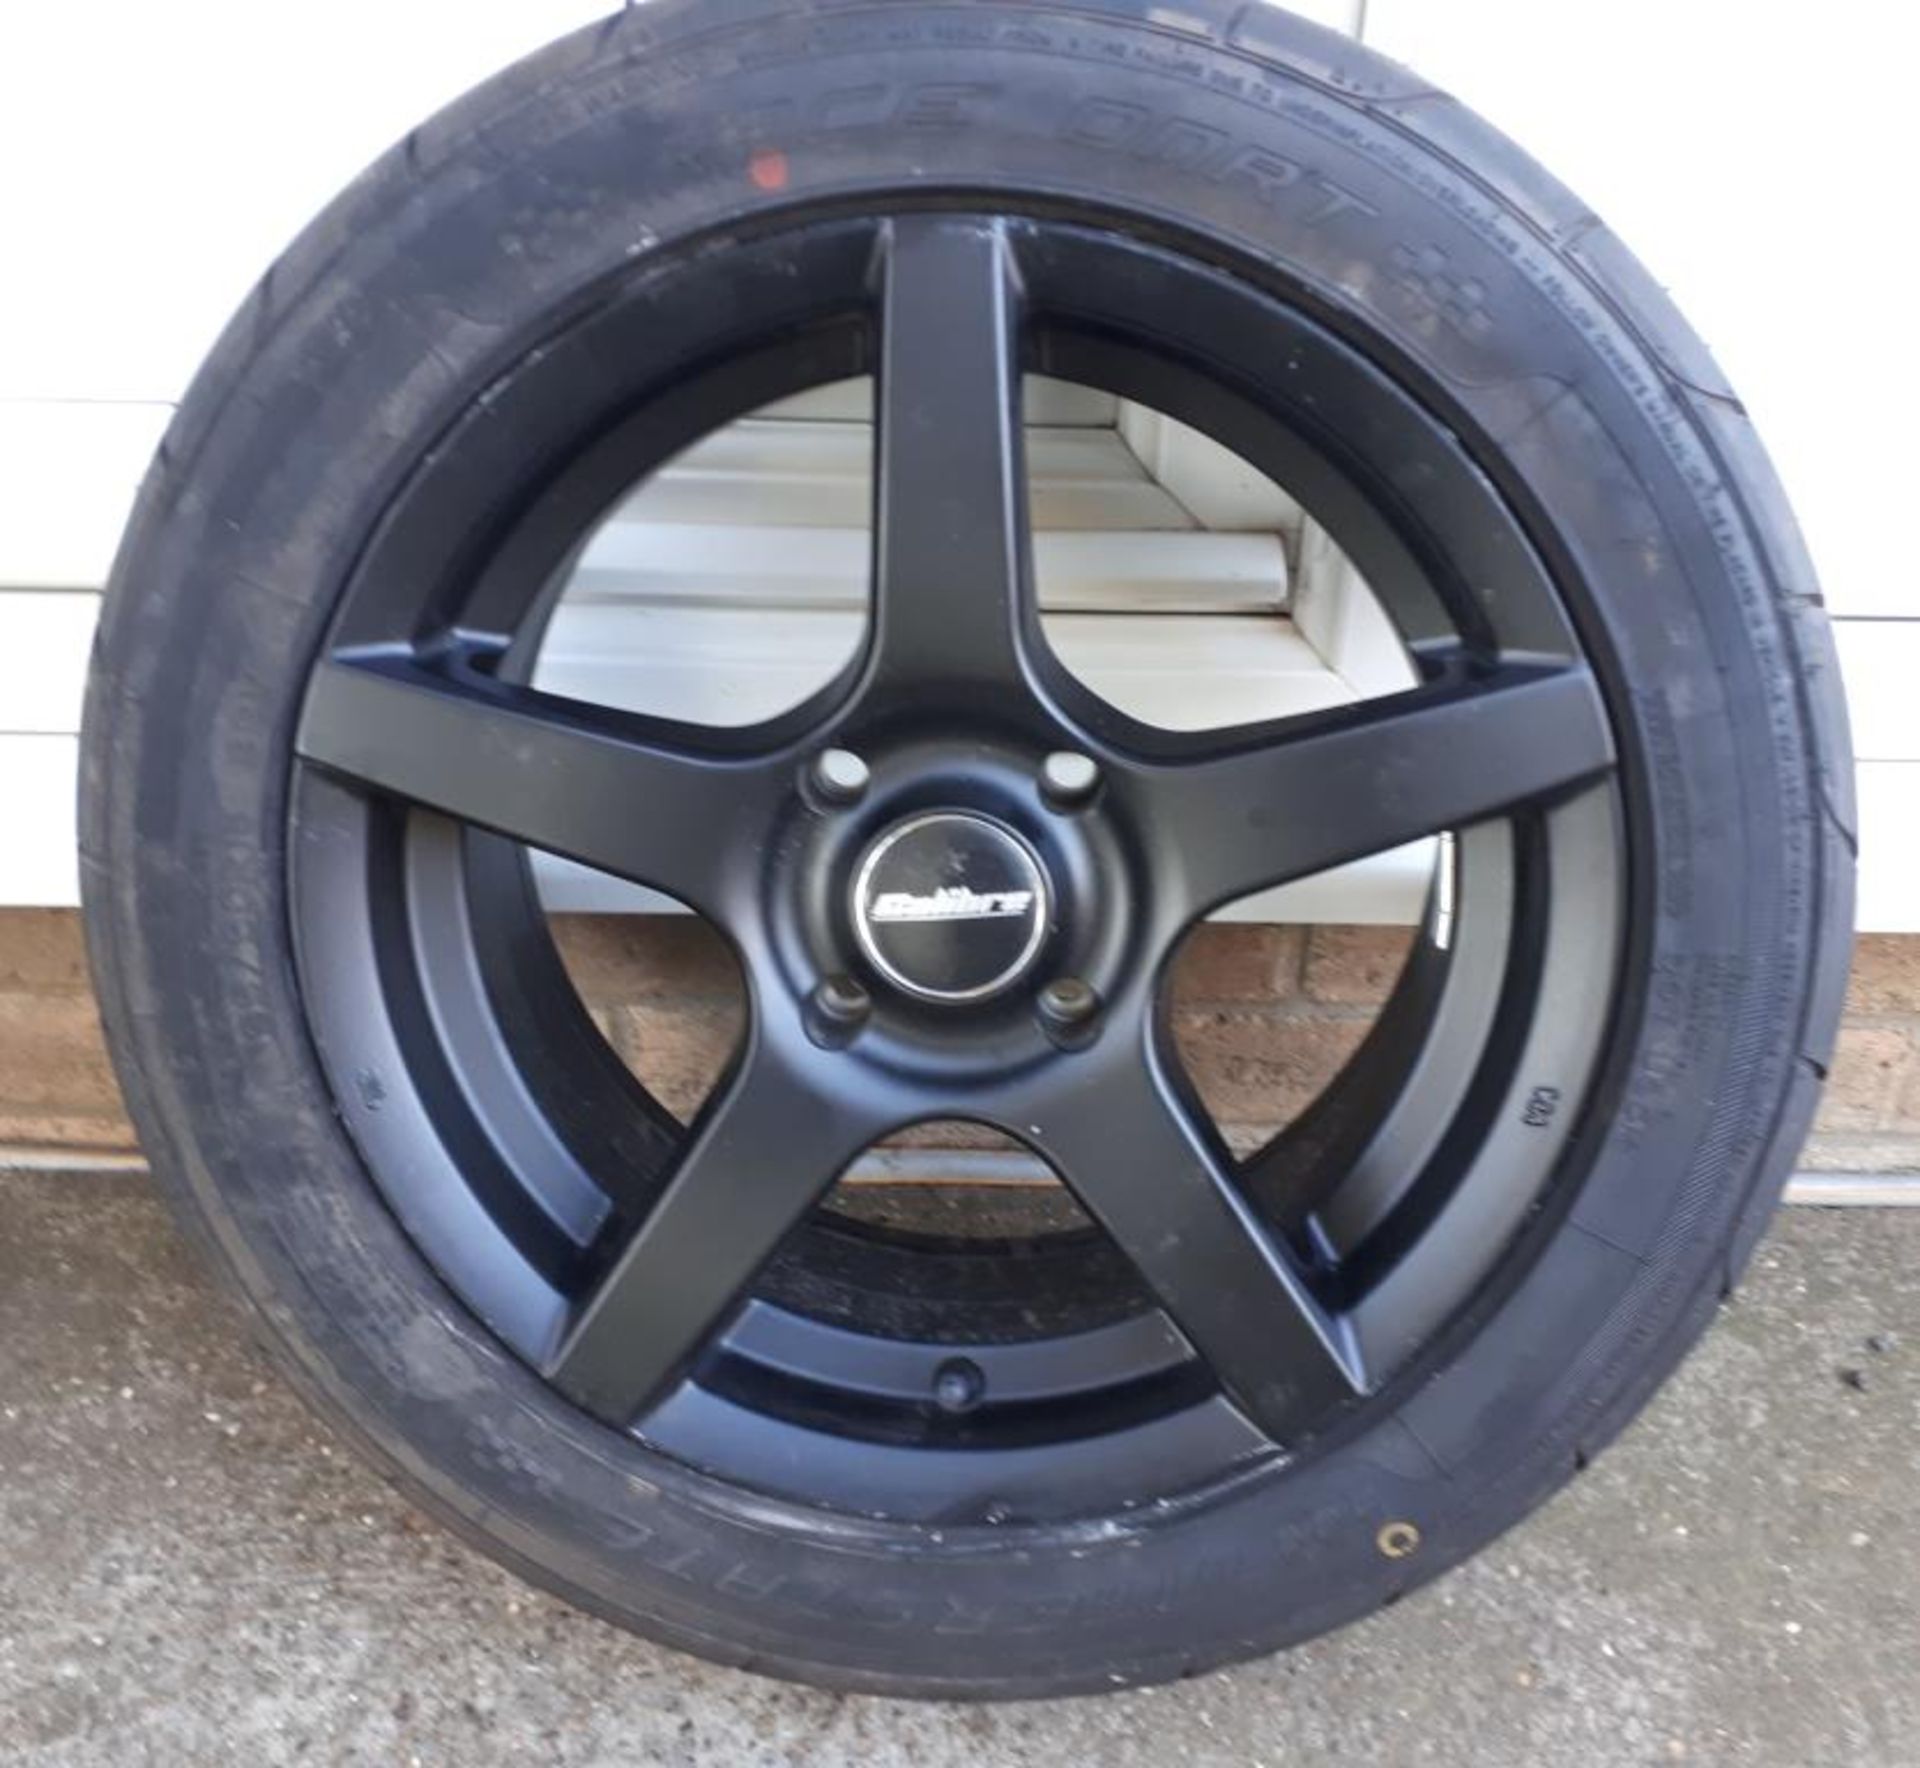 As New 15 inch Alloy wheels 195 / 50 soft compound track day tyres Ford fitment Fiesta ST 150 - Image 2 of 4